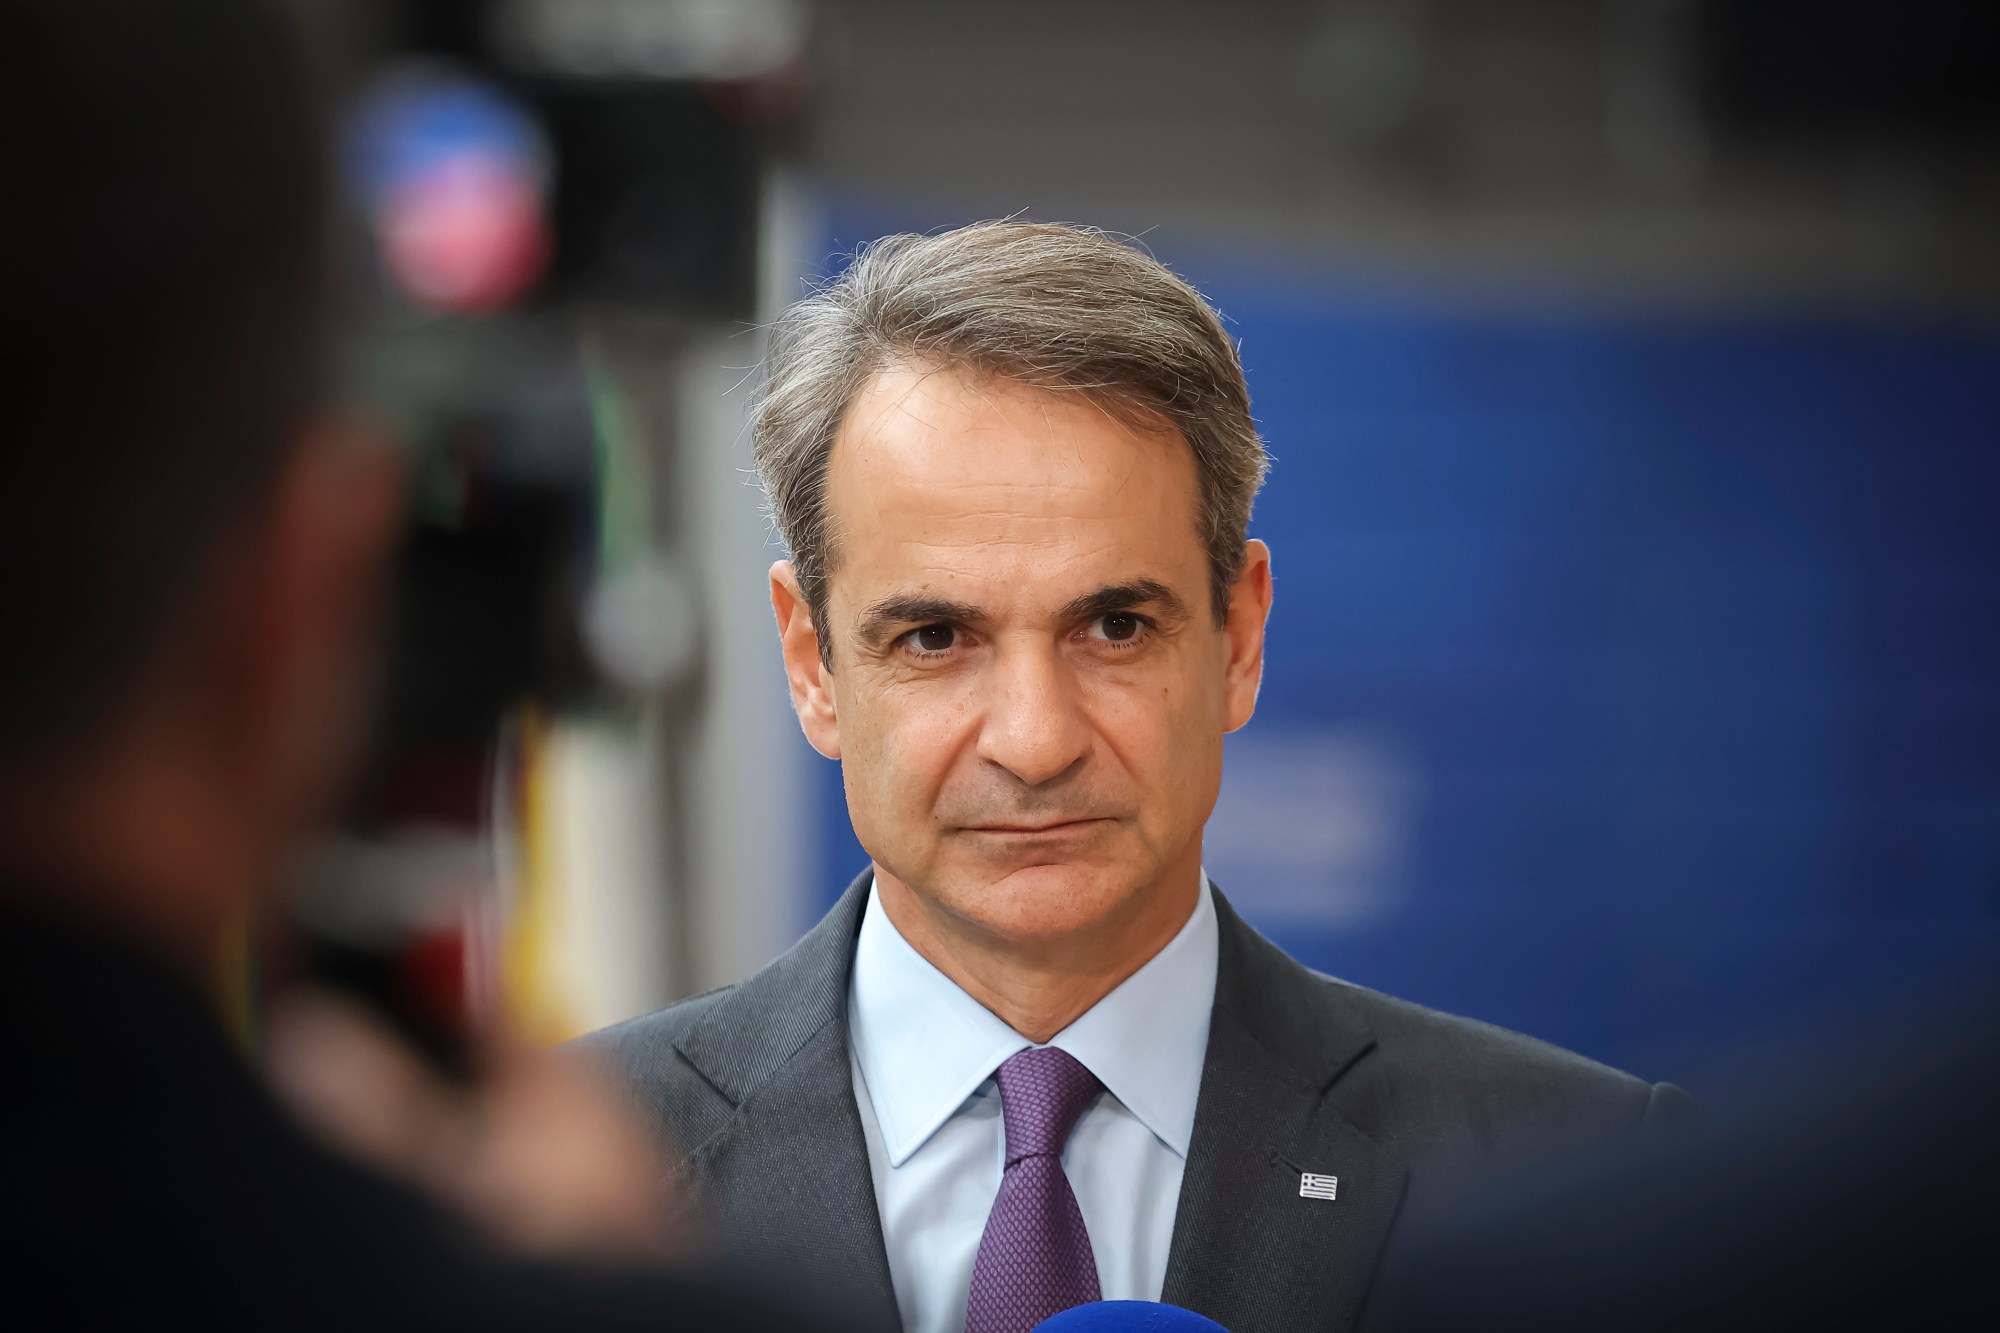 Kyriakos Mitsotakis Prime Minister of Greece at a stand up press briefing after the end of the 2-day European Council and Euro Summit, the EU leaders meeting at the headquarters of the European Union. The Greek PM makes a statement and responds to questions from the media and local press. EU leaders and heads of states have on their agenda to discuss at the 2-day summit the topics of the humanitarian pauses in Israel's war with Hamas, push for humanitarian aid corridors into besieged Gaza, the support to Ukraine after Russia's invasion, economy and the migration crisis situation. EUCO in Brussels, Belgium on 27 October 2023  (Photo Nicolas Economou/NurPhoto via Getty Images)